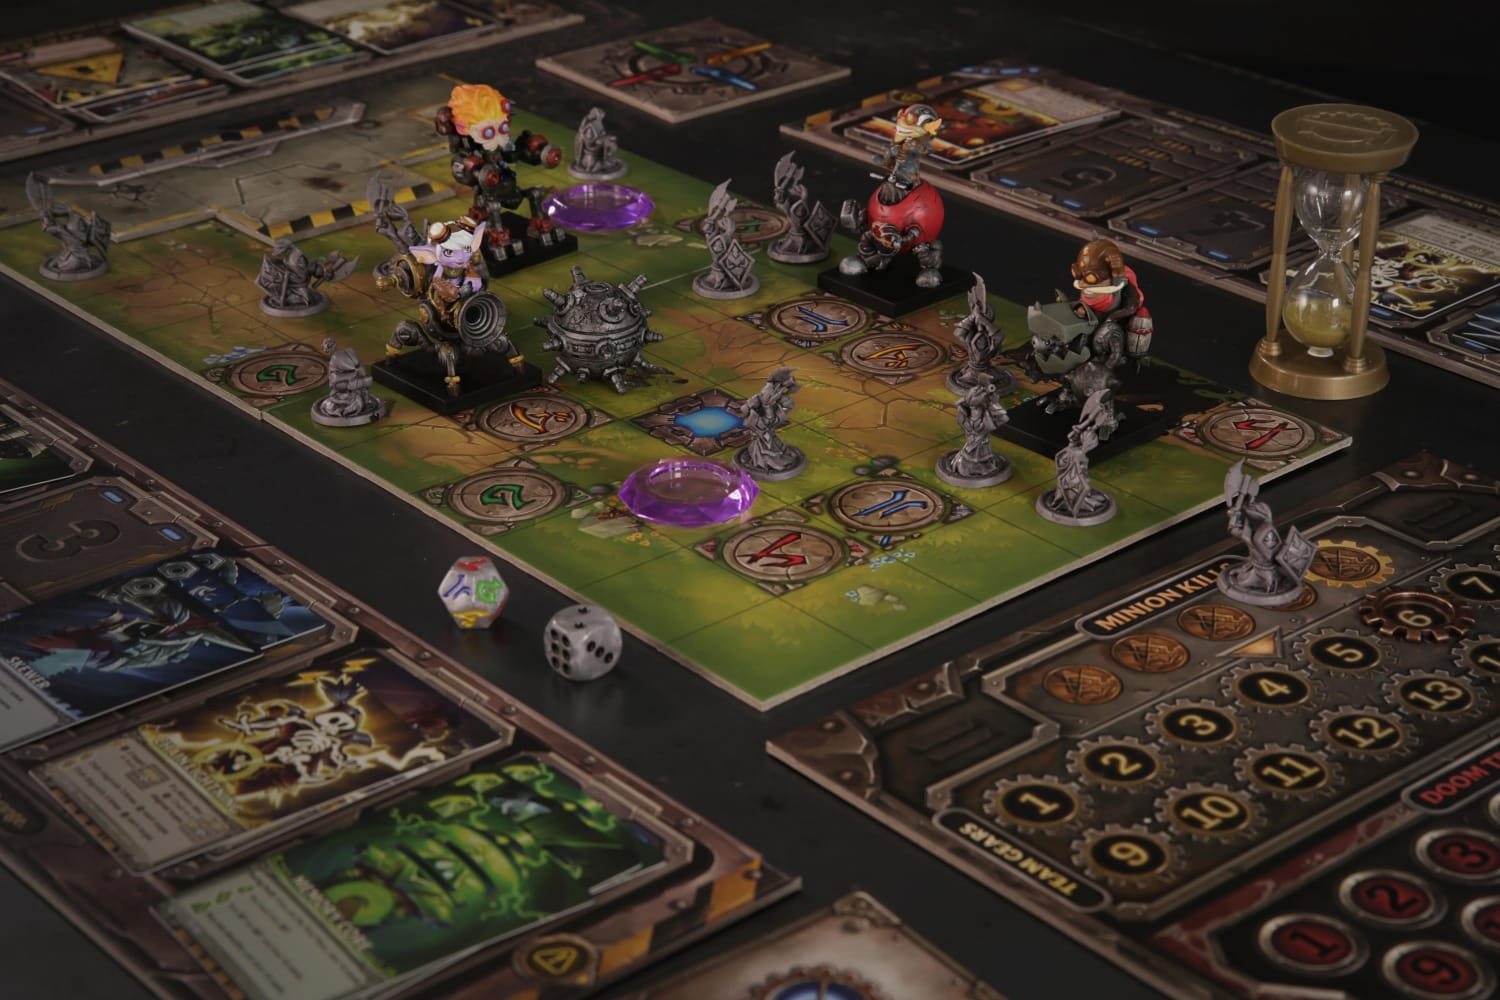 Mechs Vs Minions League of Legends board game interview